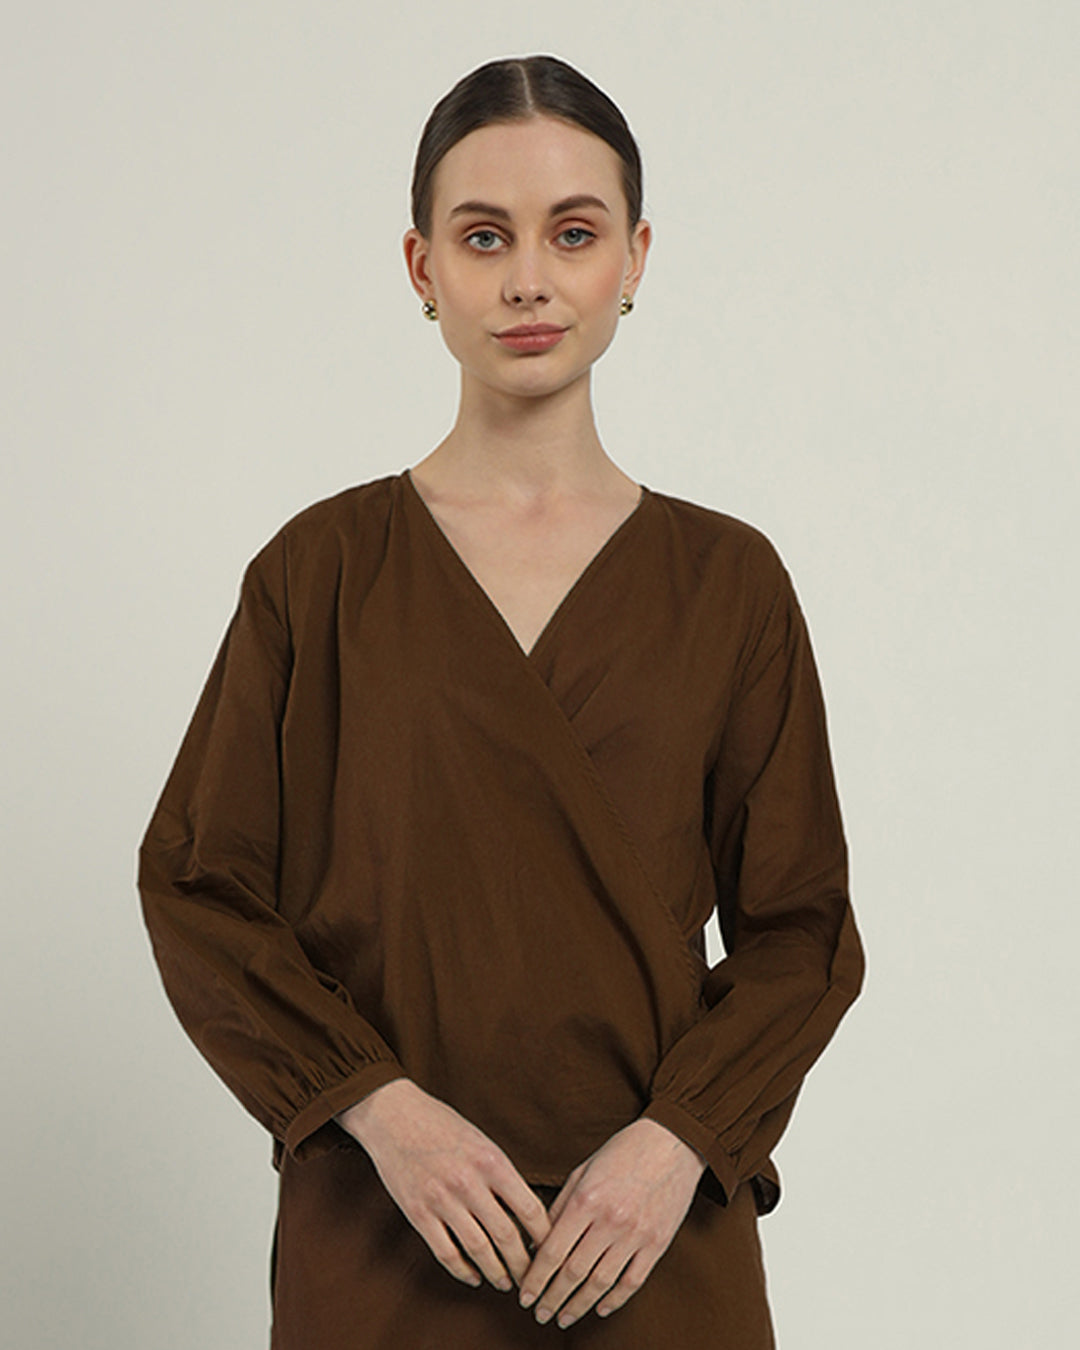 Nutshell Flare & Wrap Full Sleeves Top (Without Bottoms)